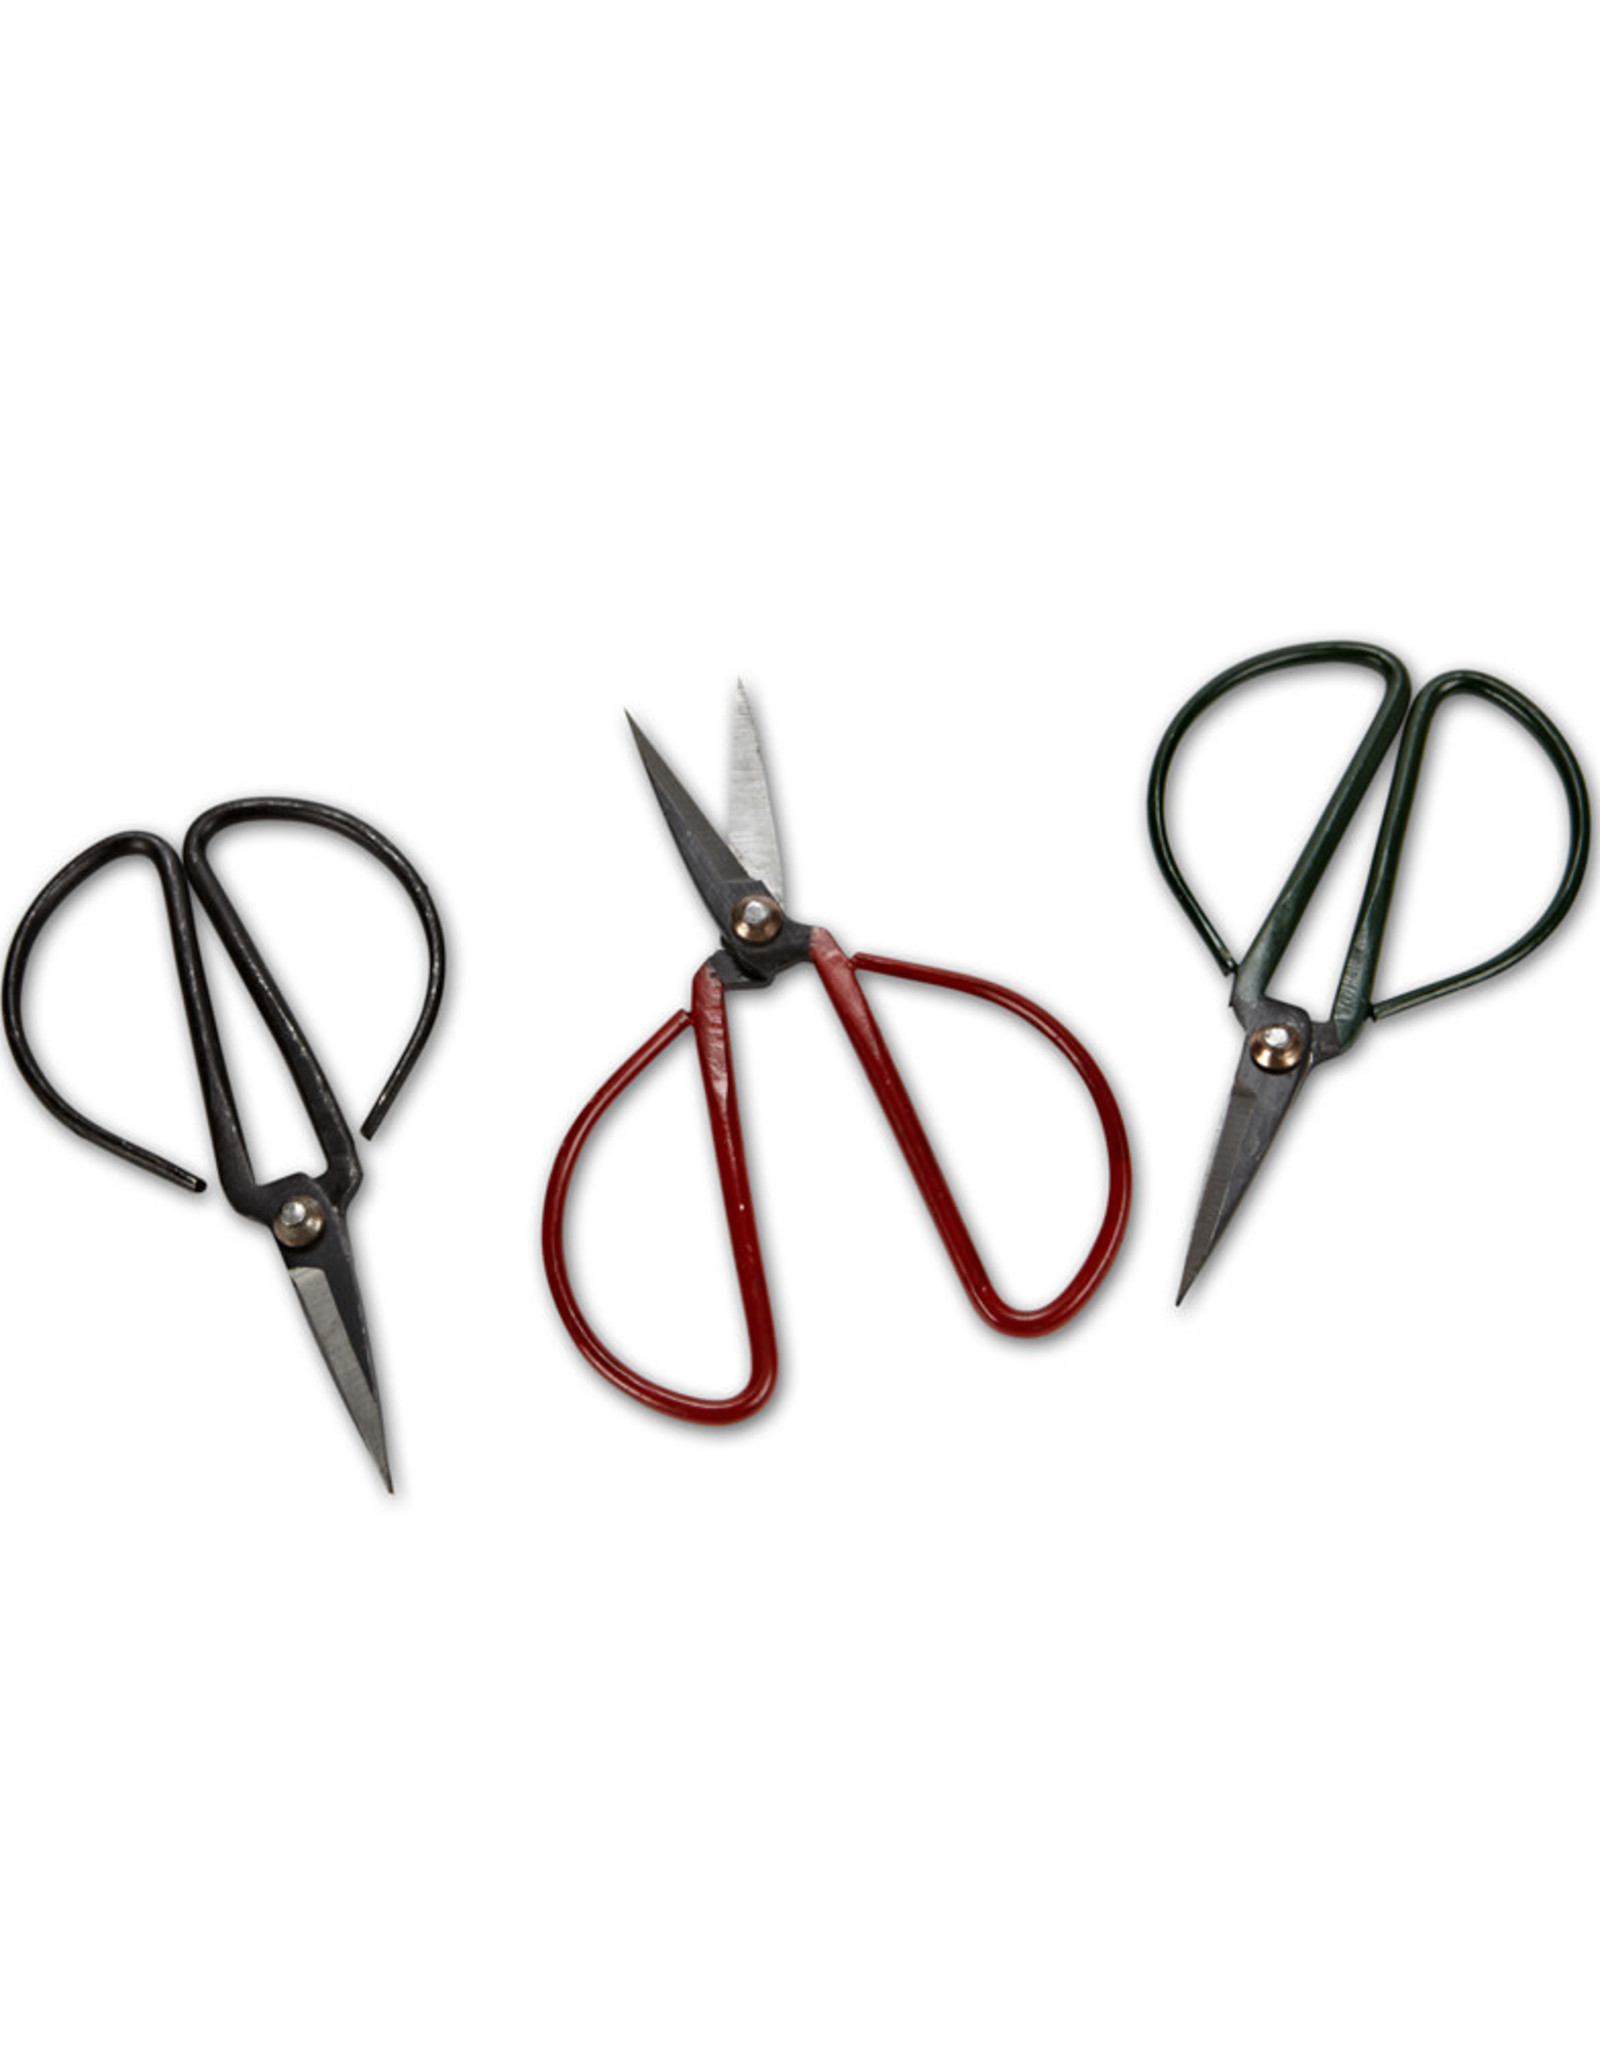 Small Flower Stem Shears - 3 Assorted Colours